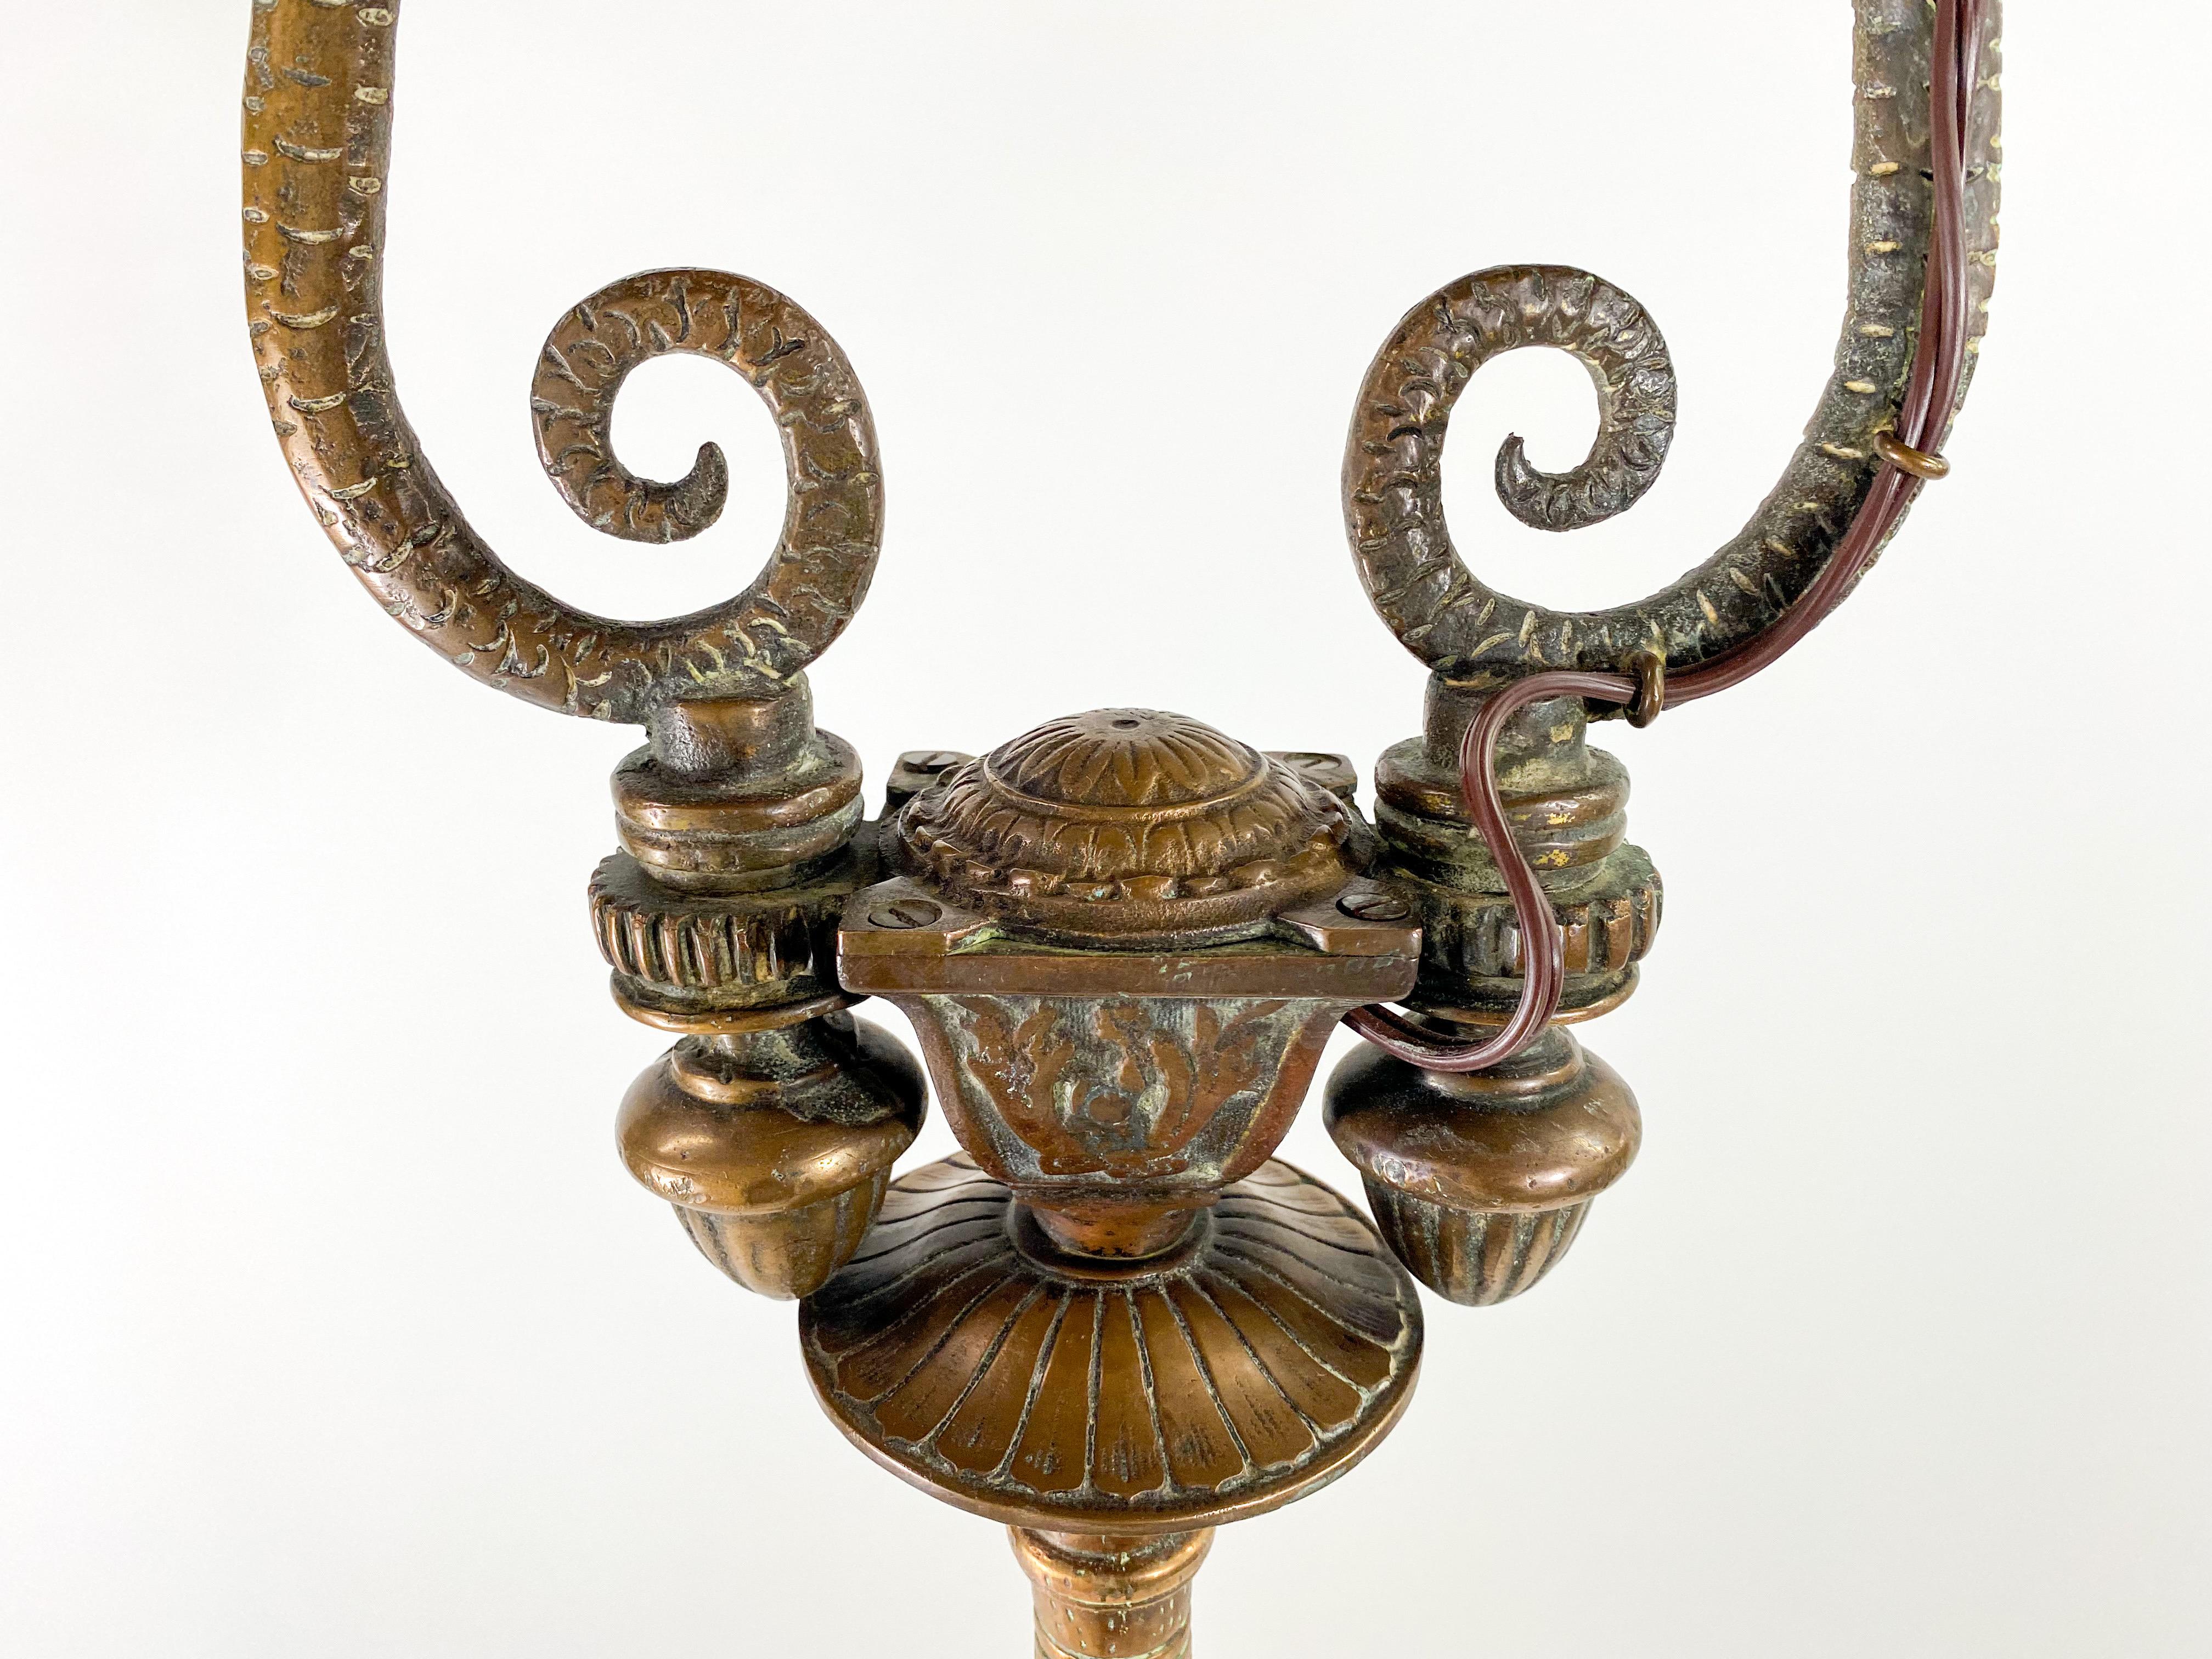 19th Century French Rococo Revival Style Bronze Patinated Dragons Floor Lamp For Sale 3